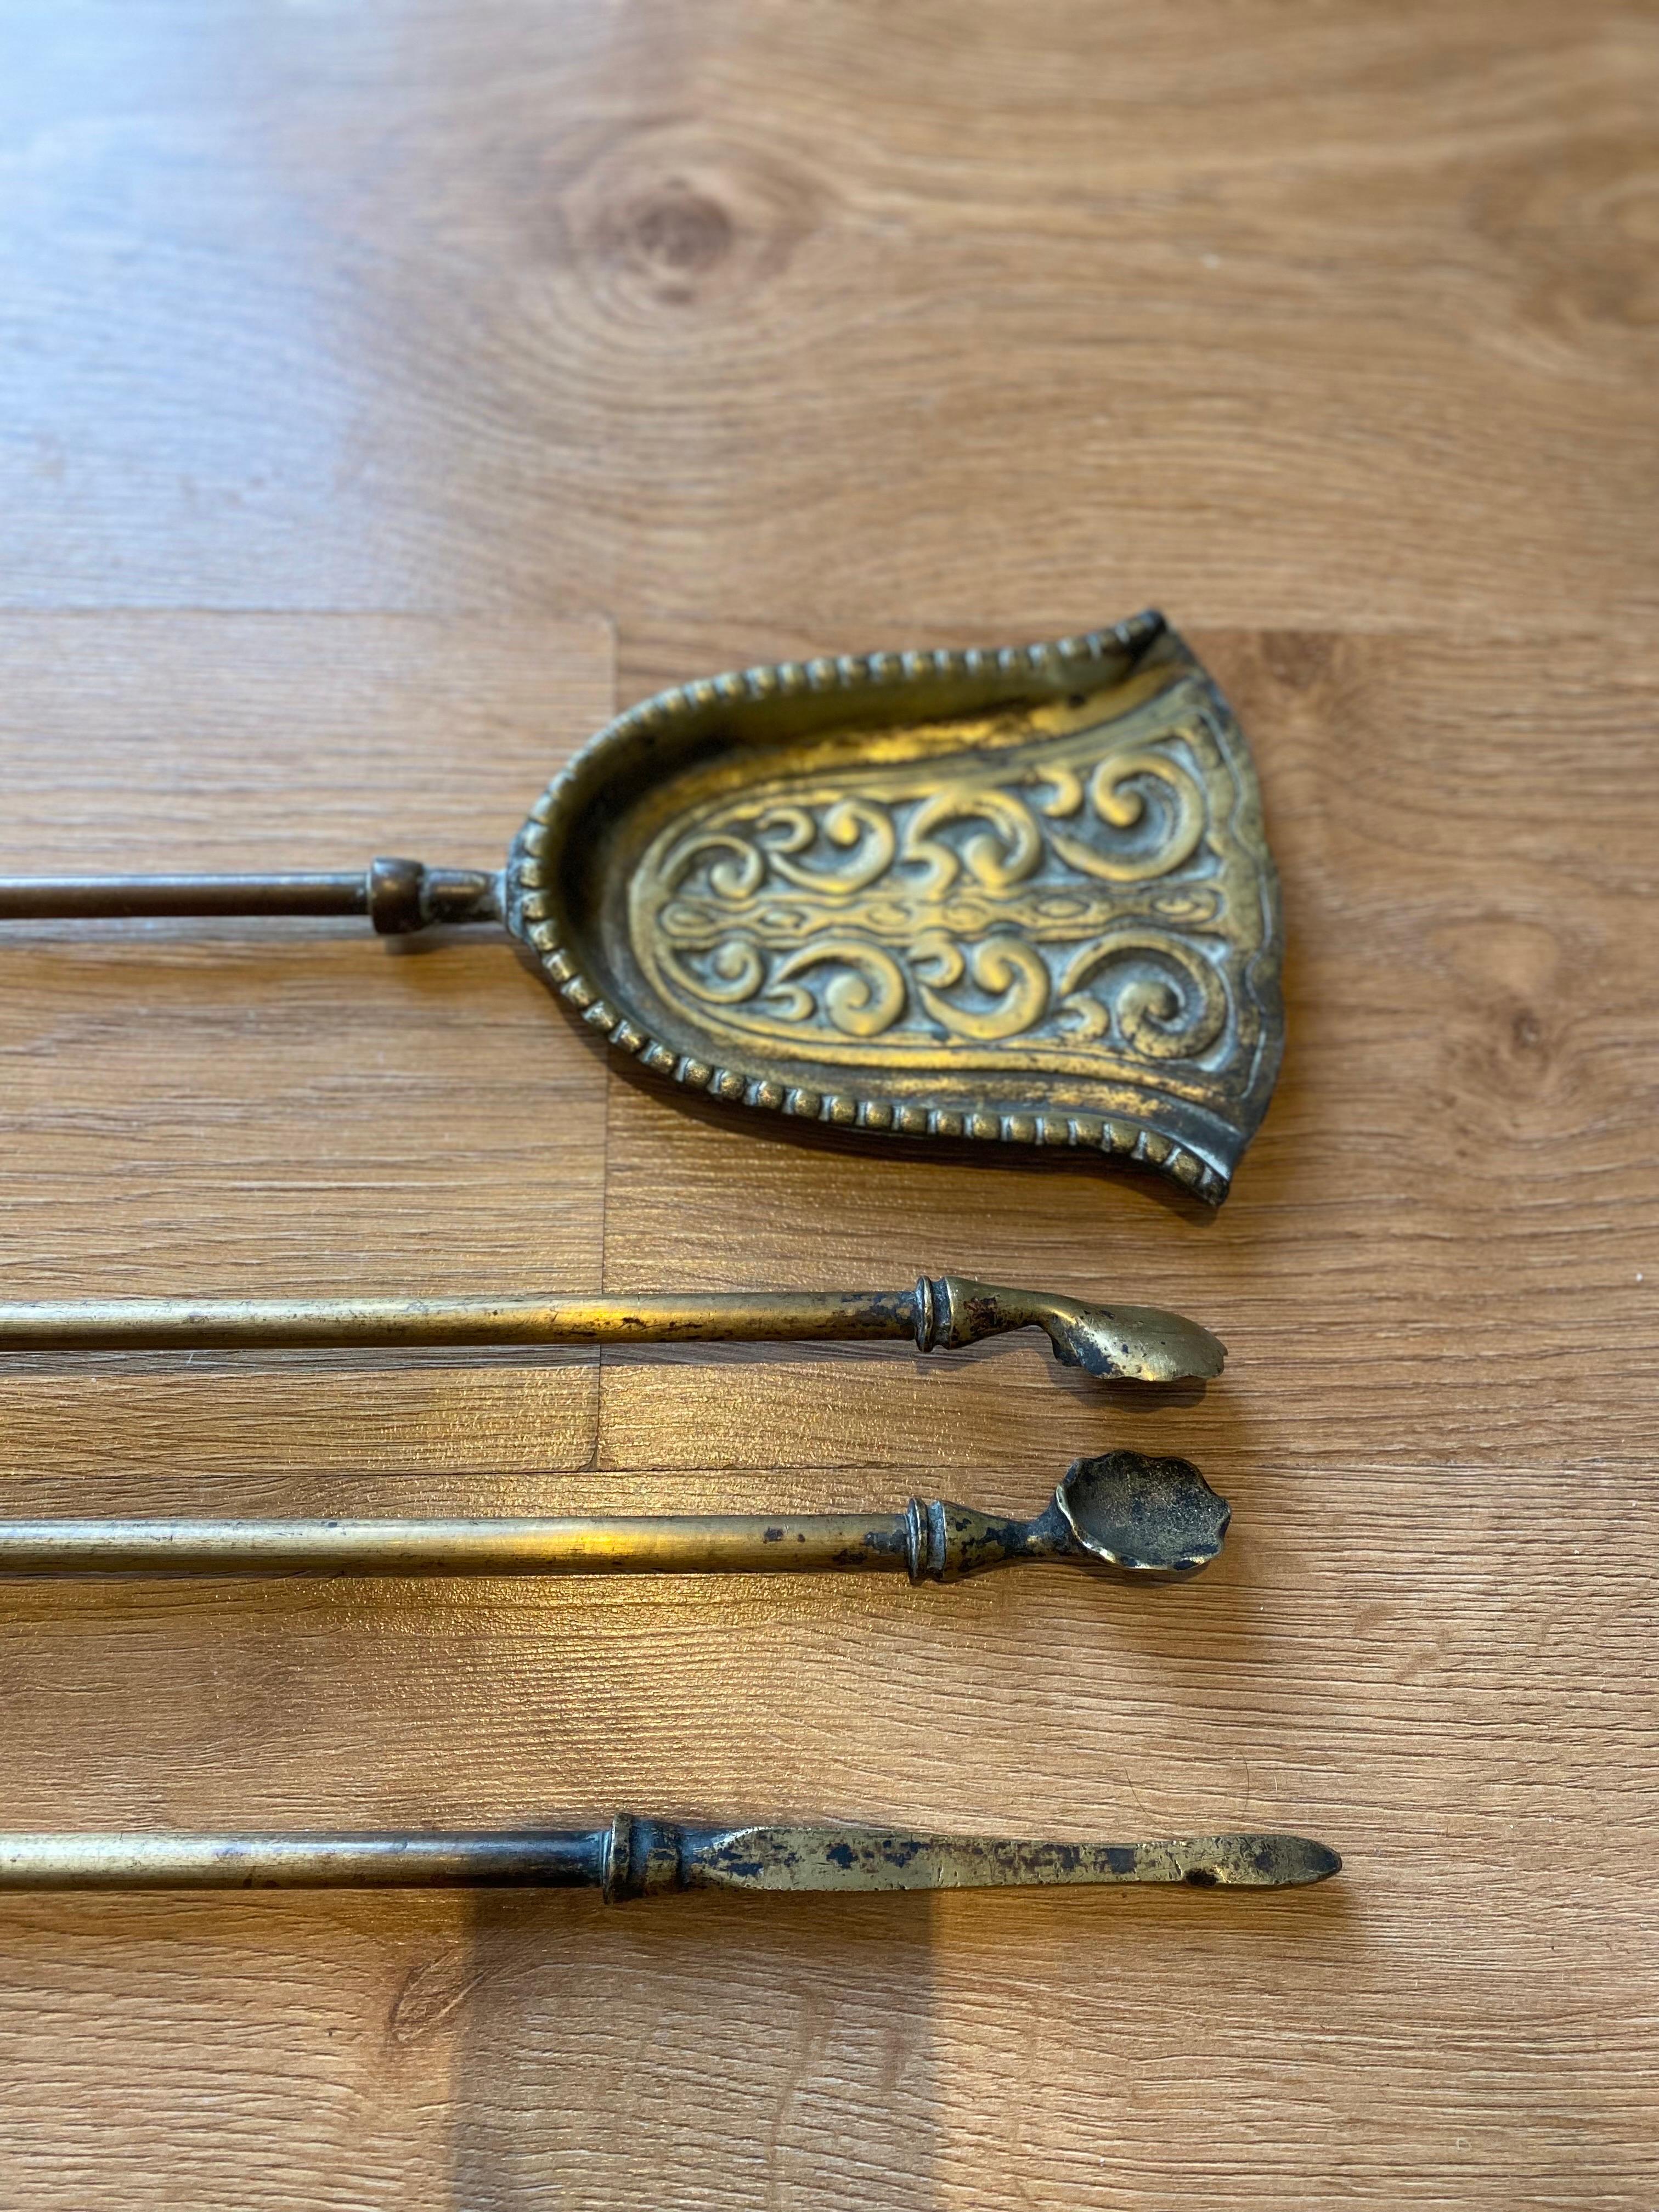 Victorian Gothic Brass Fire Companion Set, 19th Century For Sale 4